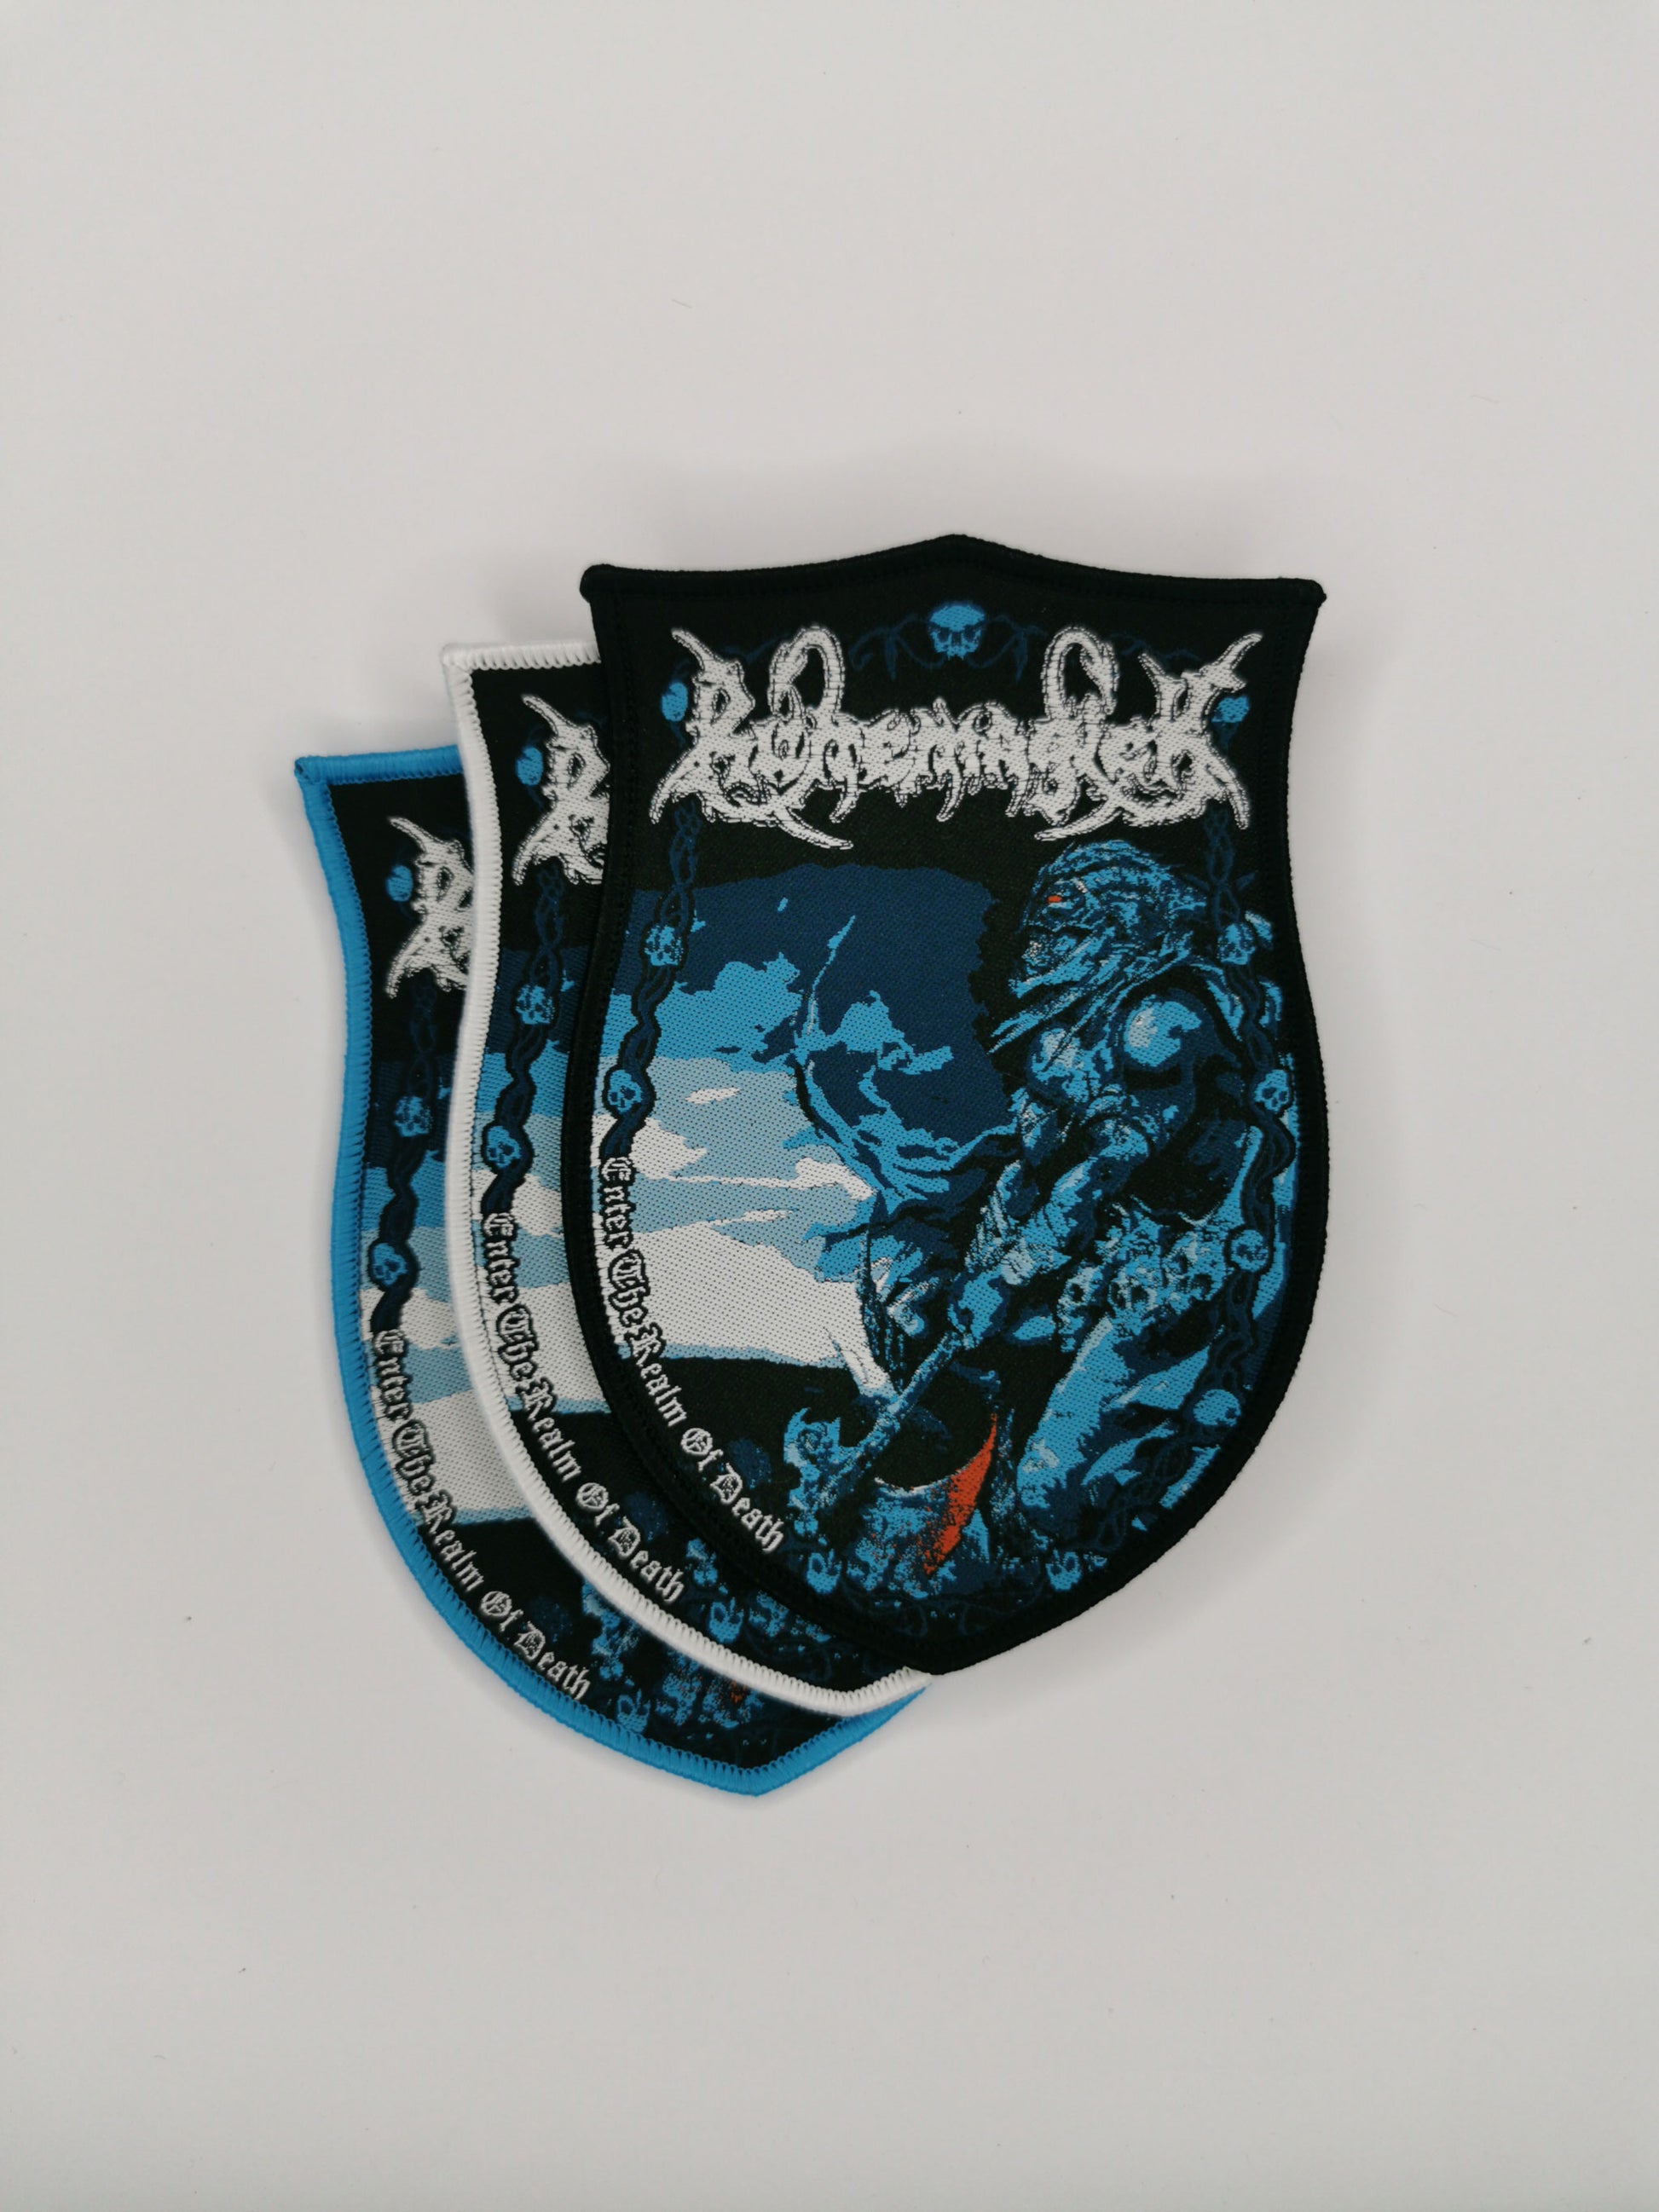 Temporal Dimensions Patches Runemagick Enter the Realm of Death Metal Woven Patches